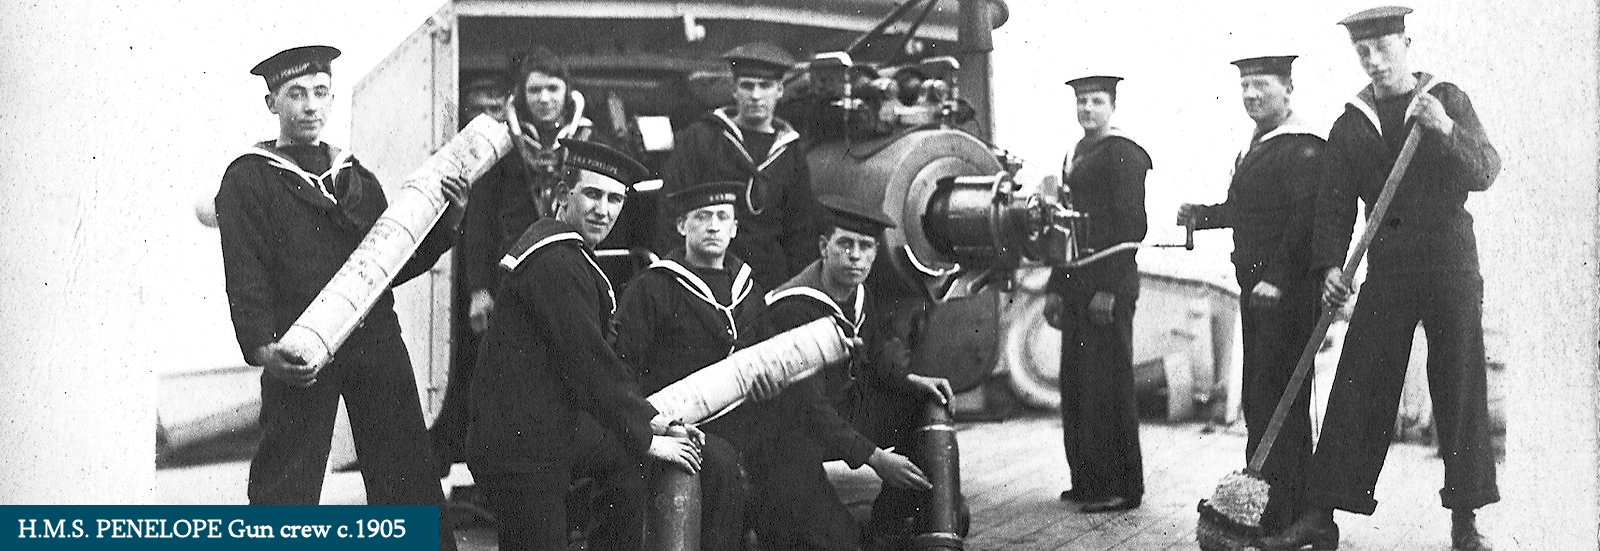 H.M.S. Penelope gun crew posed with shell and charge